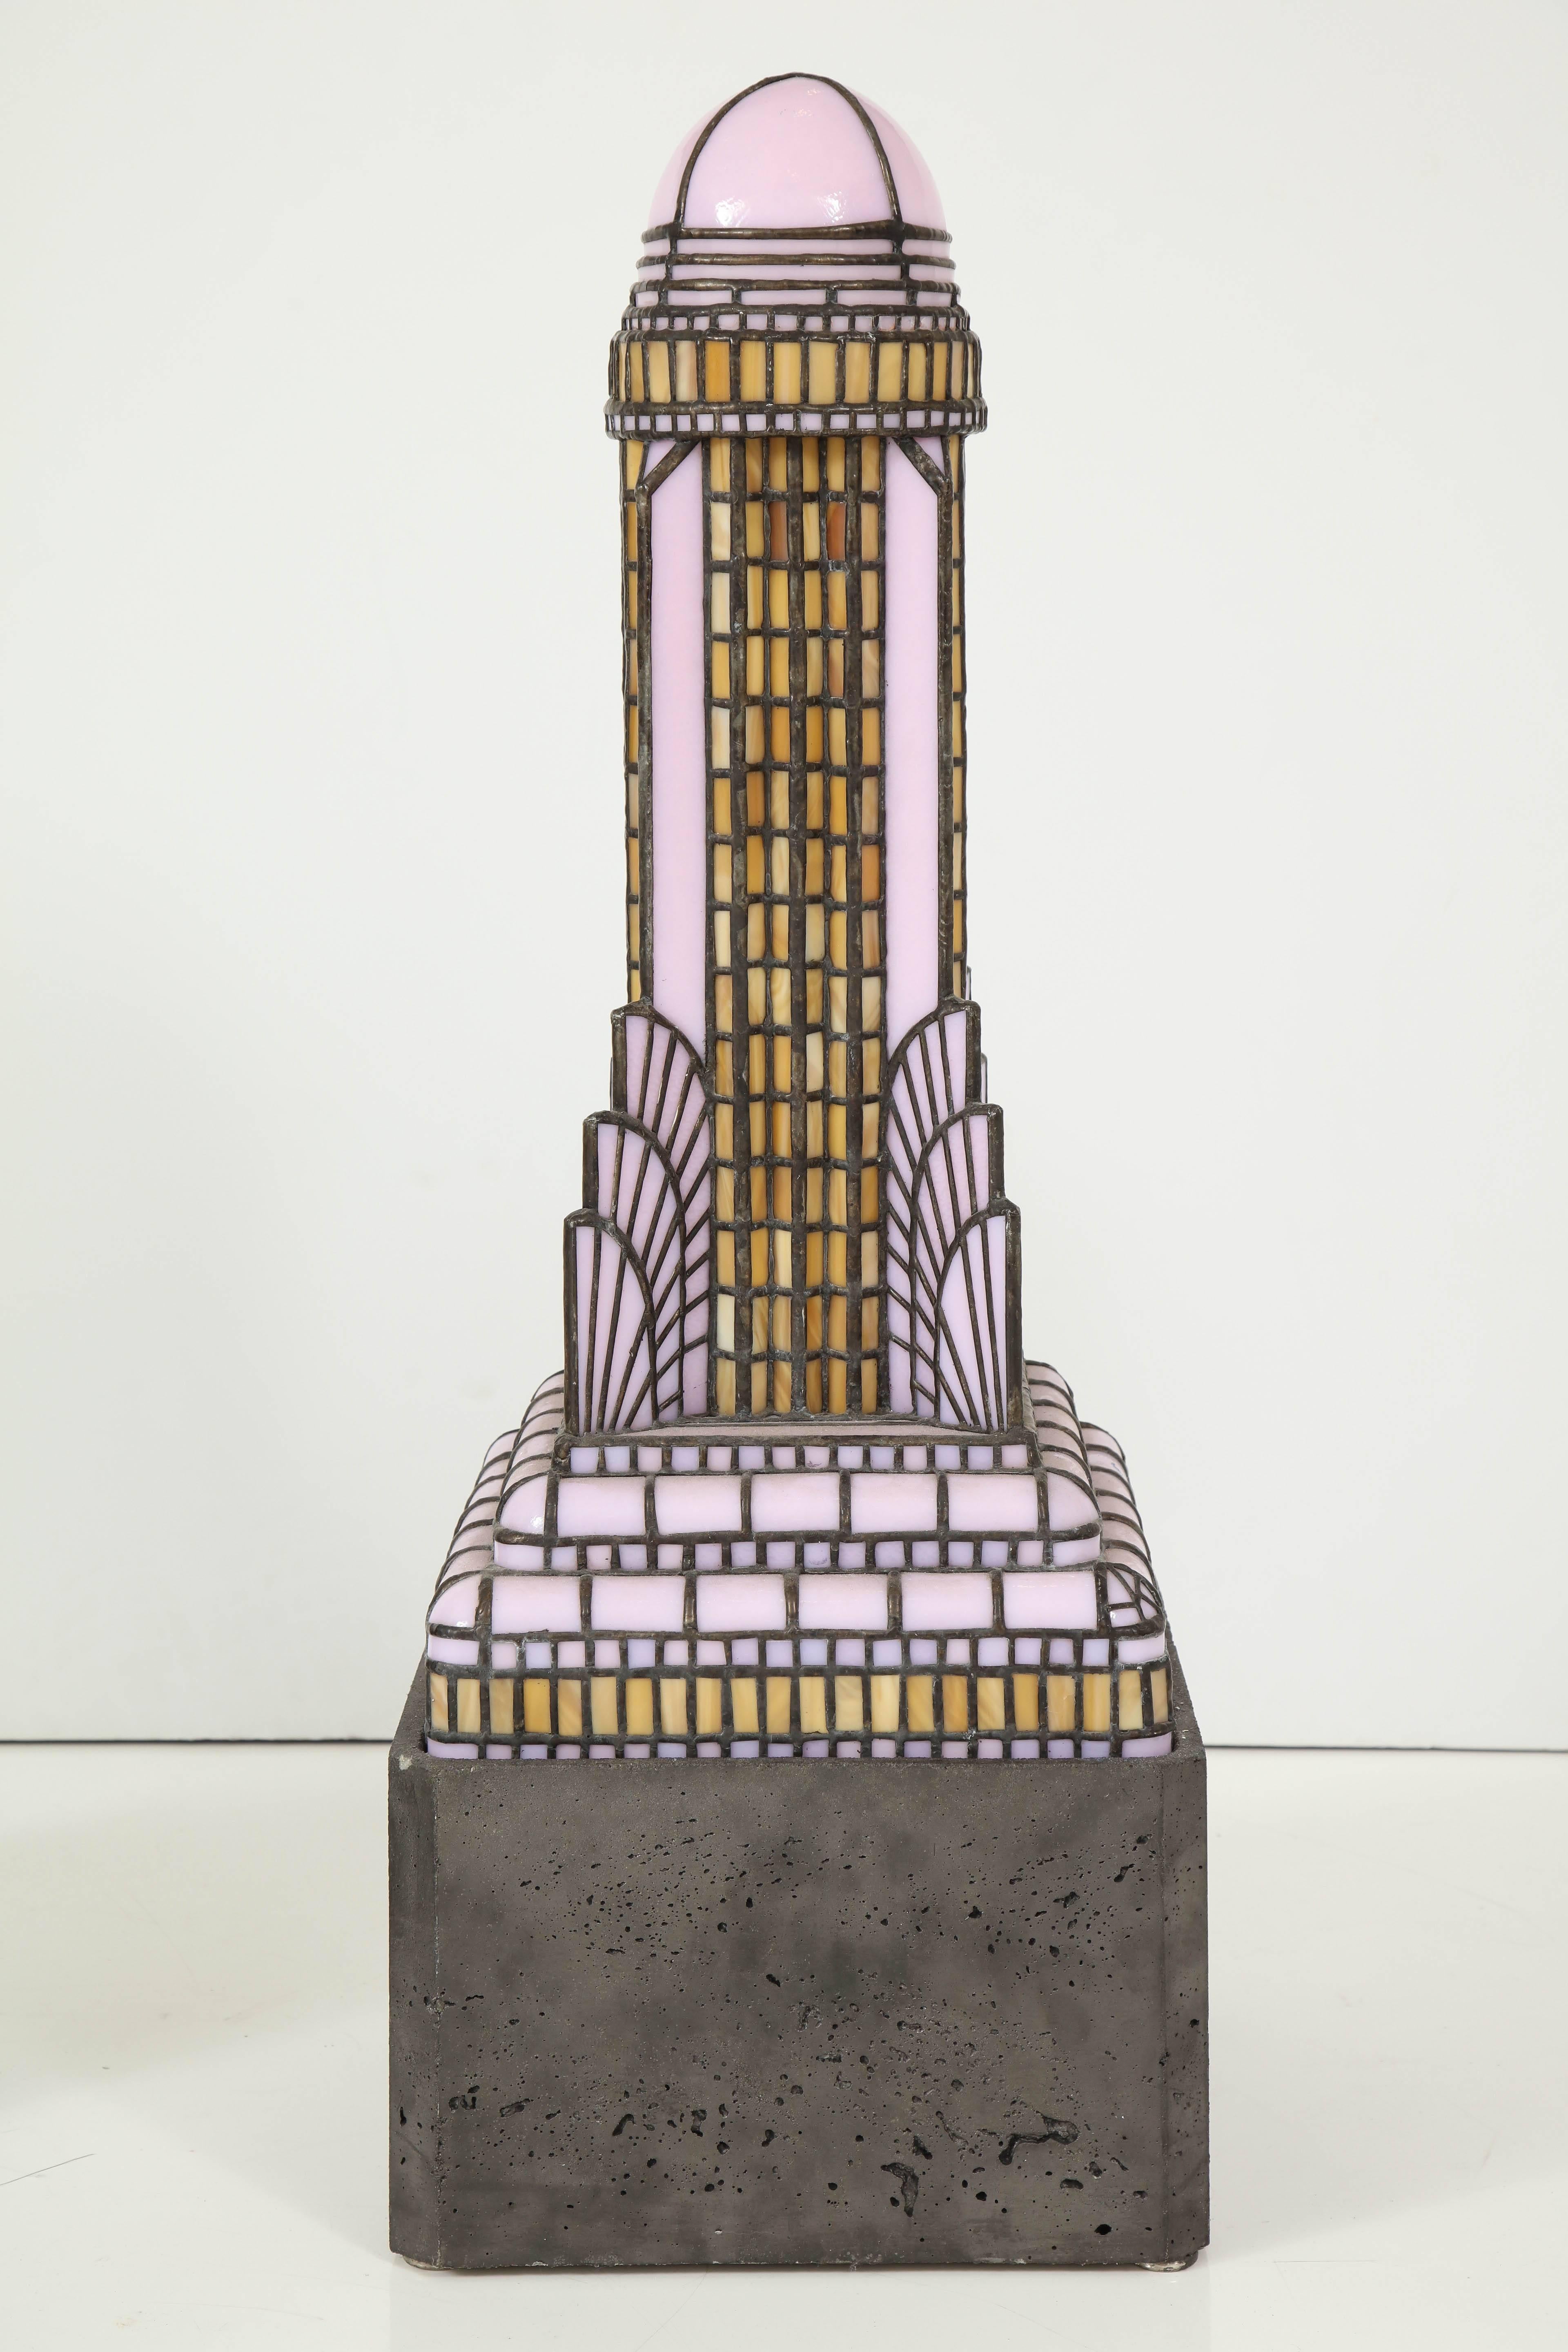 Light fixture sculpture by artist Adam Kurtzman of the Chrysler Building, New York City. USA, 2016. Stained glass (pink/mustard yellow) and metal light on concrete lighted base. Takes a U.S. bulb. May be viewed at the Metropolis Modern showroom at